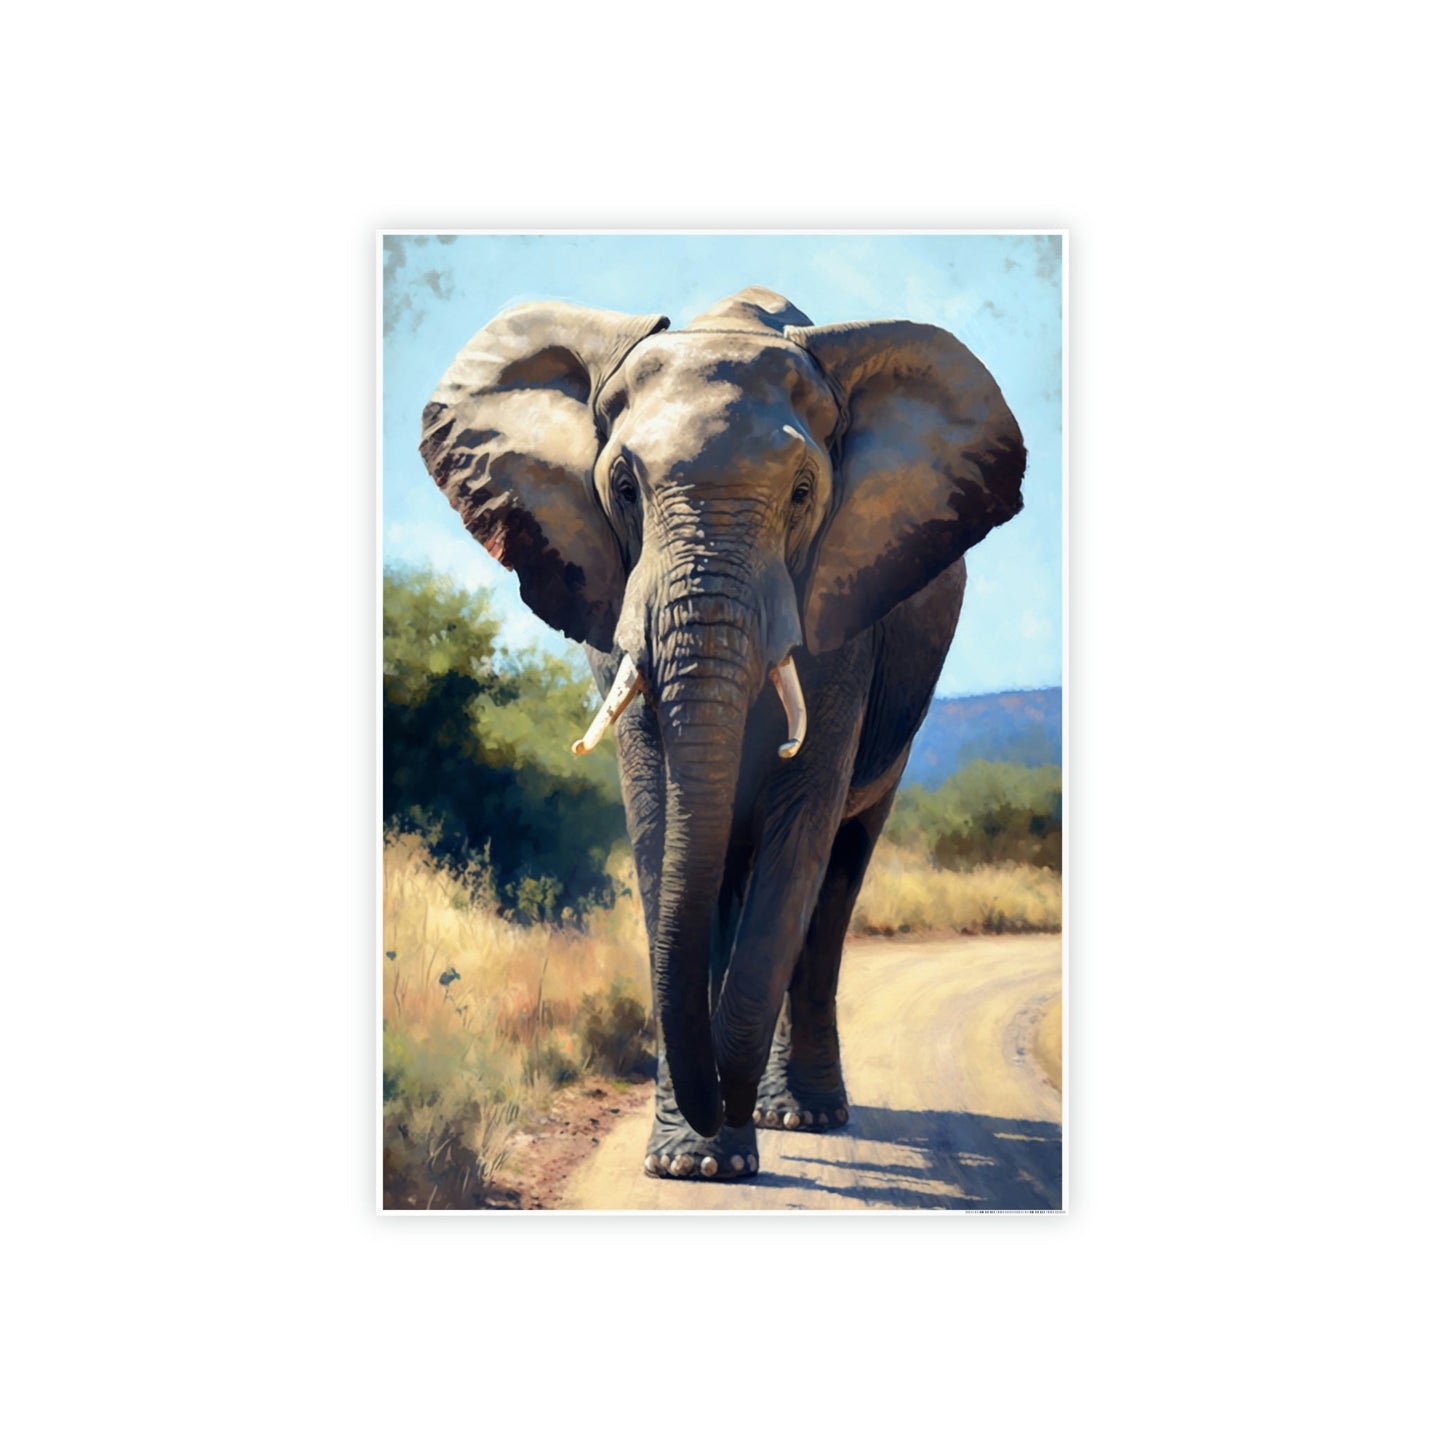 Elephant in the Wild: Breathtaking Framed Canvas for Nature Lovers